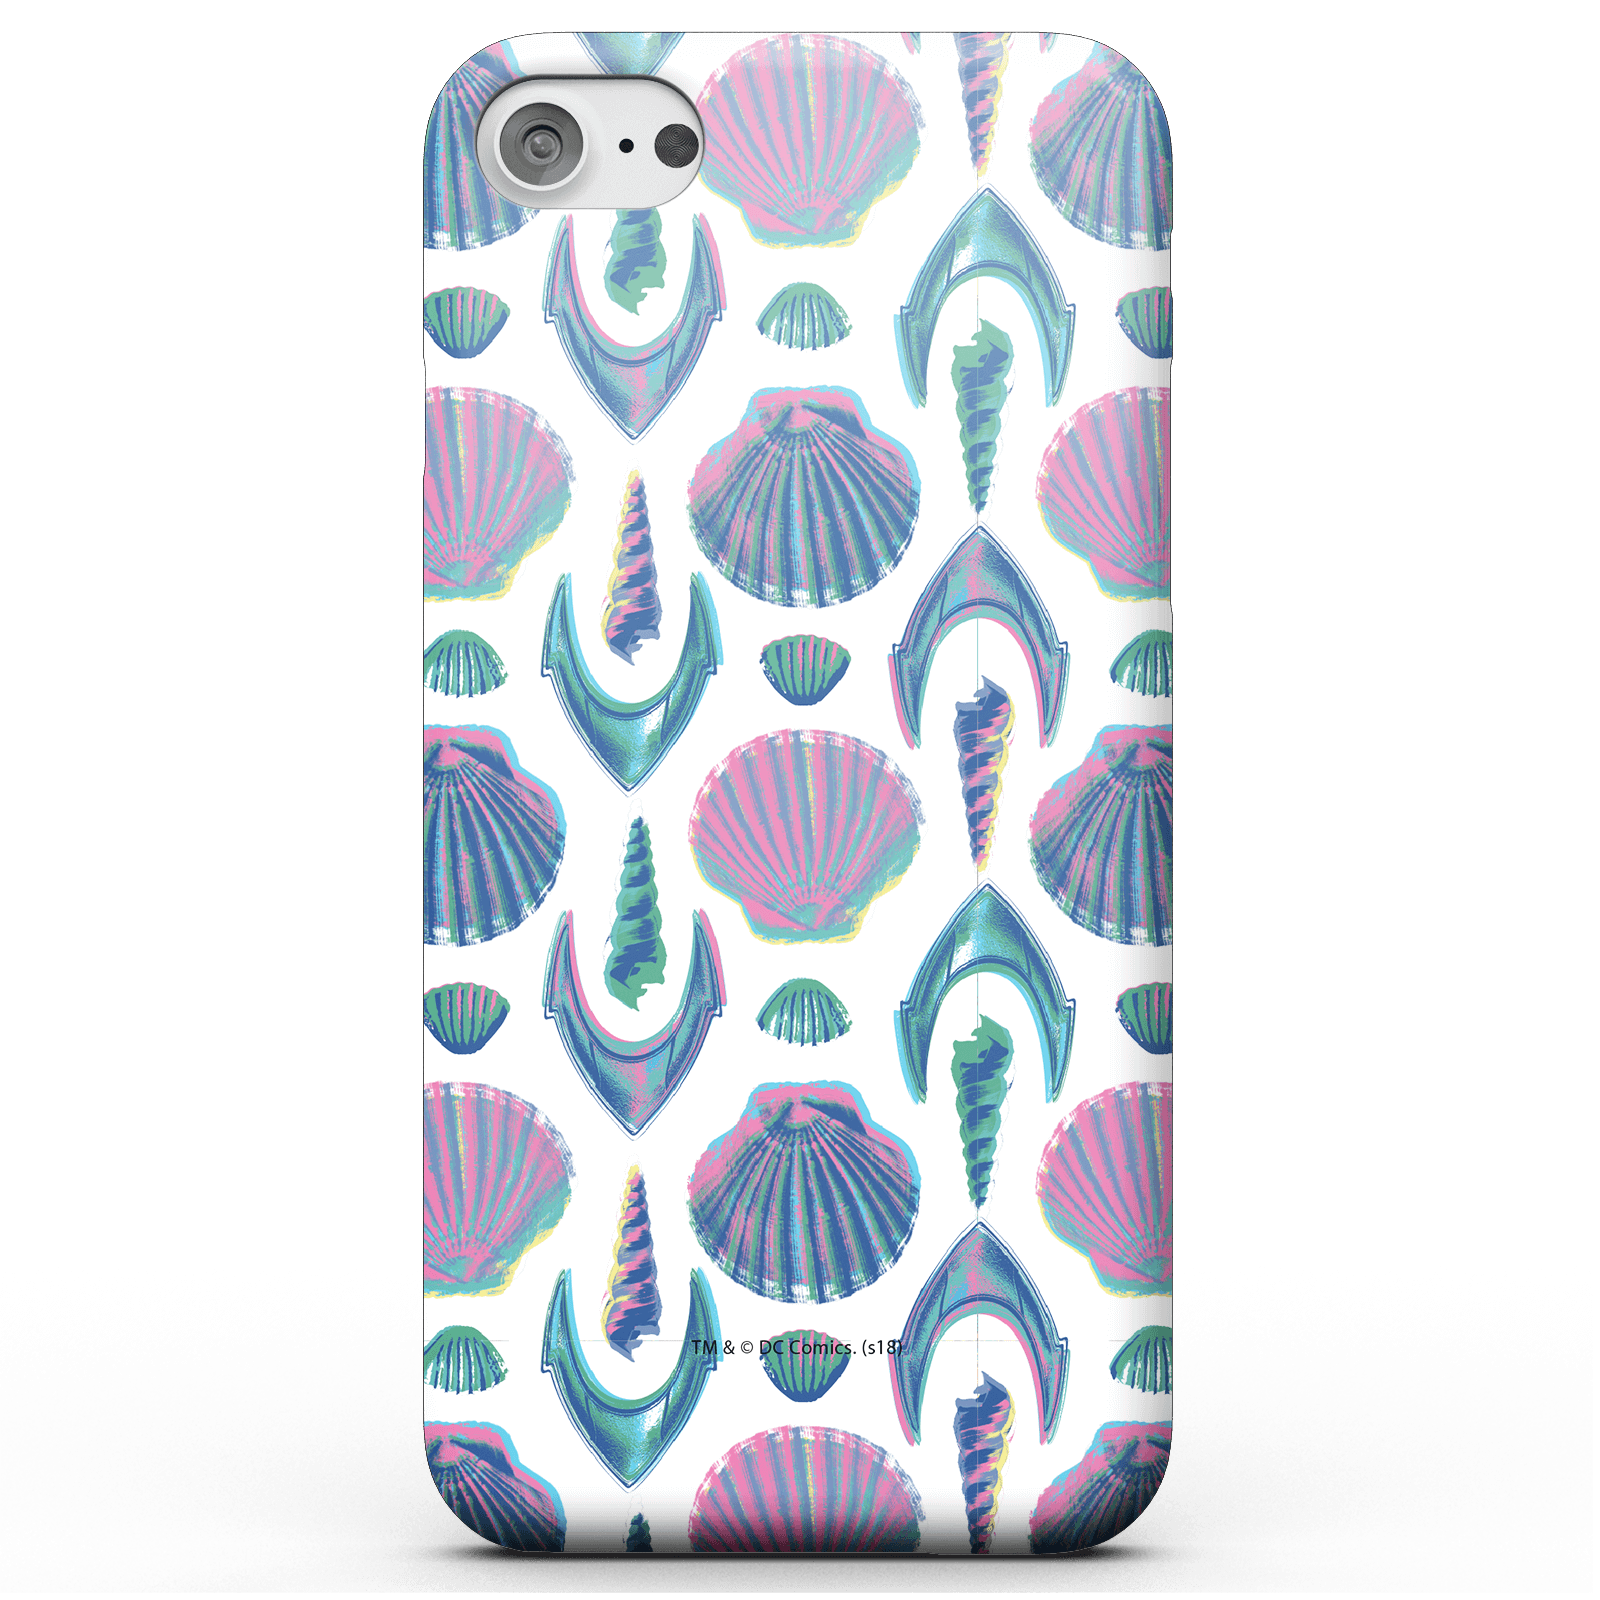 Aquaman Mera Sea Shells Phone Case for iPhone and Android - iPhone 6 - Snap Case - Gloss